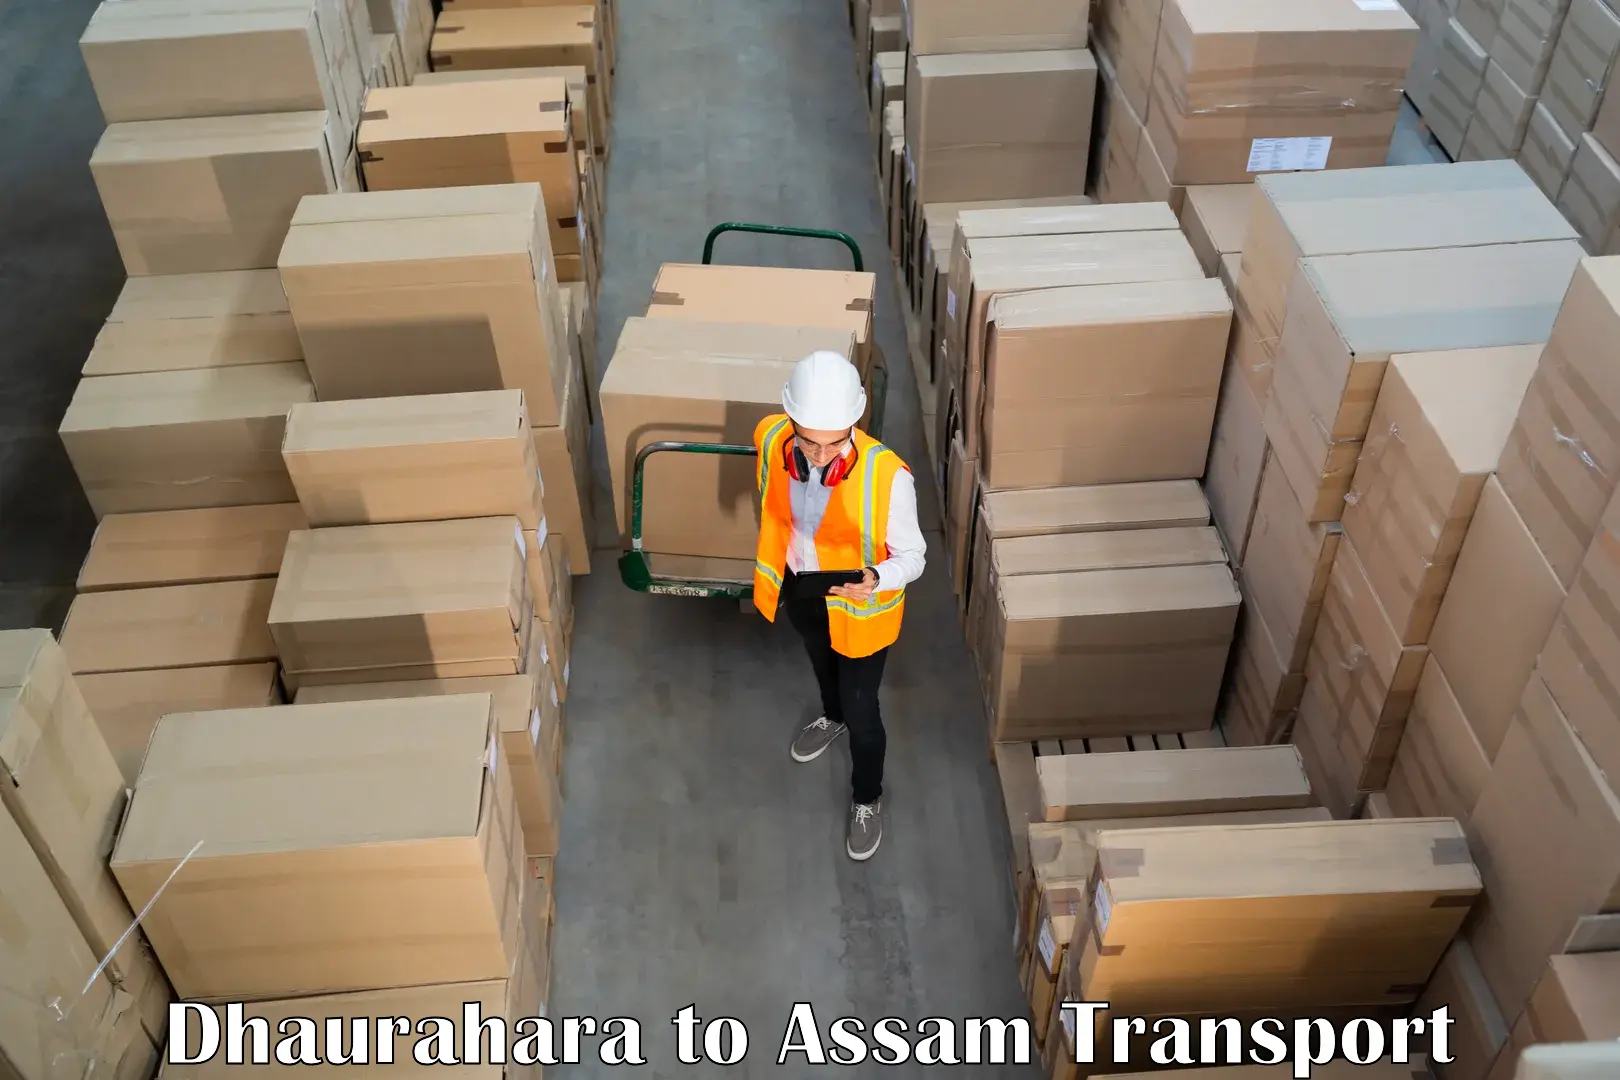 Truck transport companies in India Dhaurahara to Kaliabor